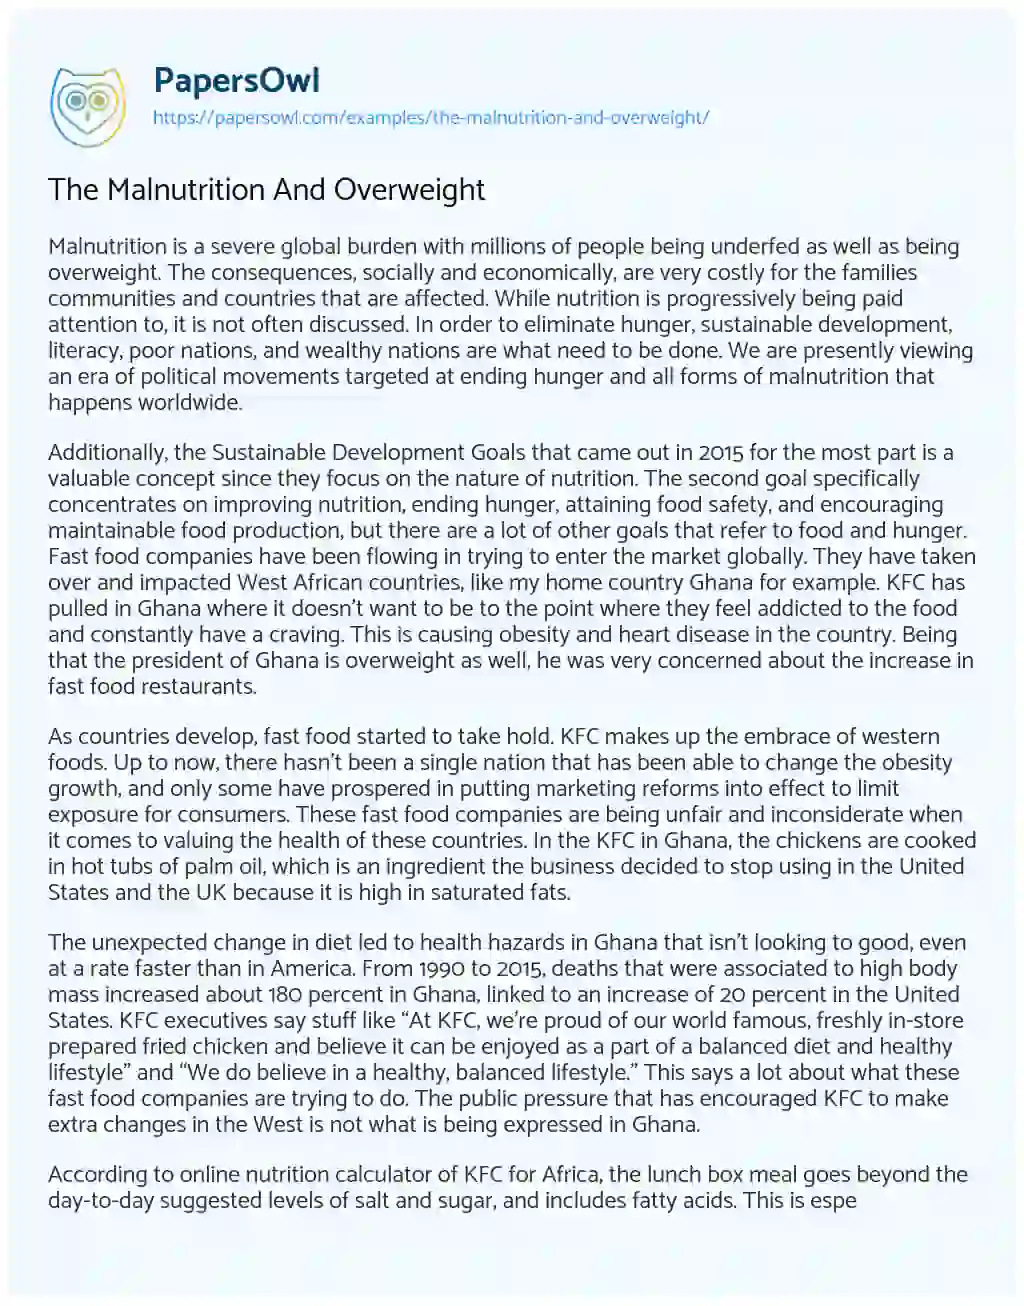 Essay on The Malnutrition and Overweight